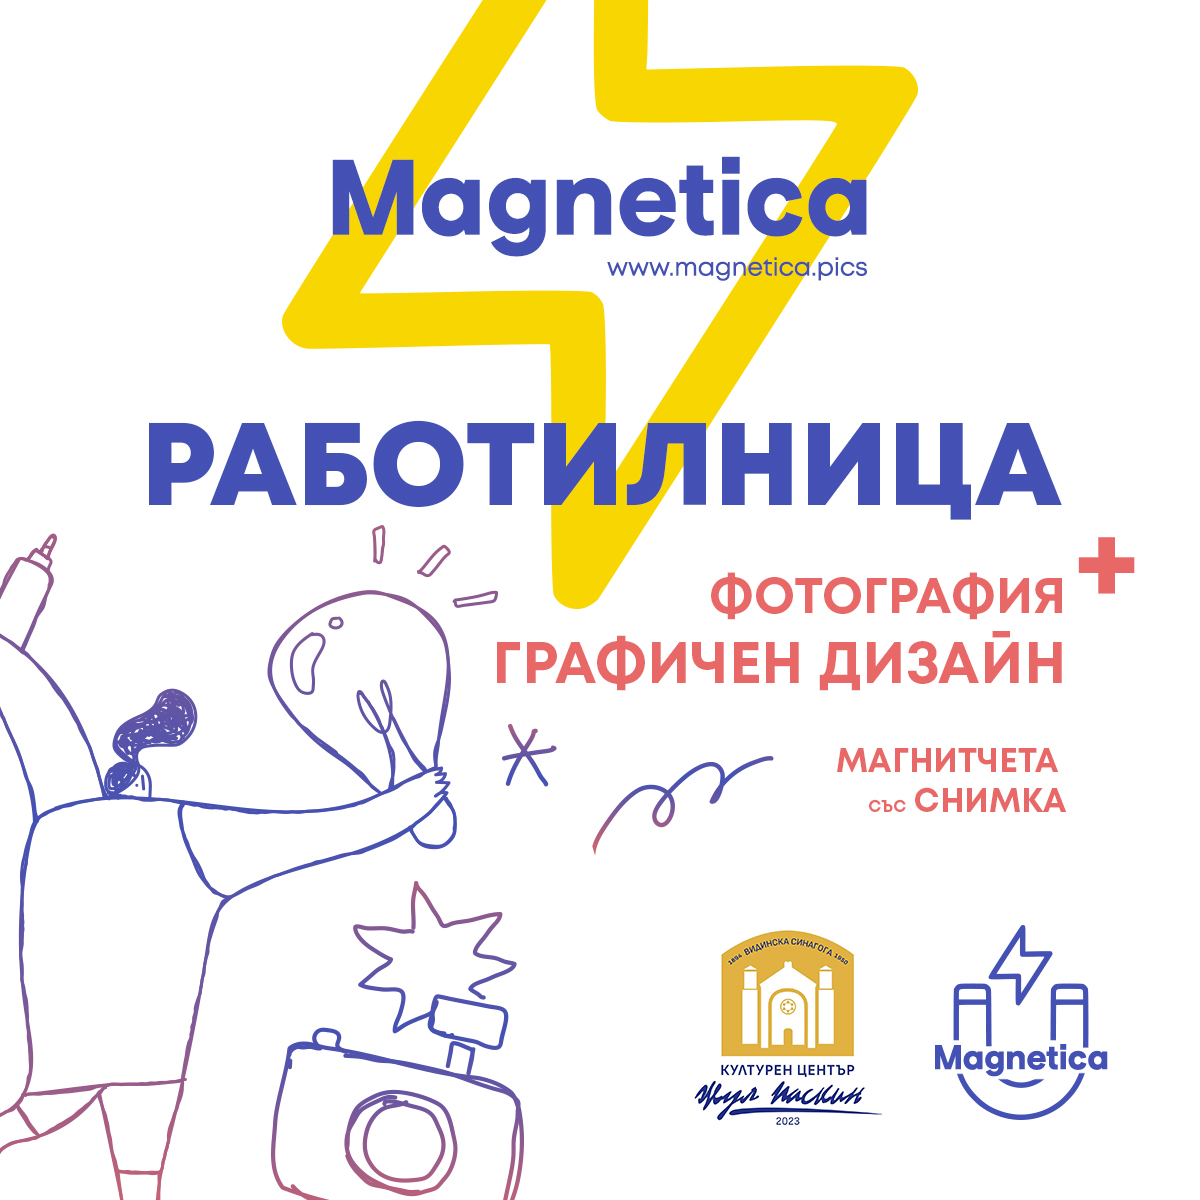 The First Workshop of Magnetics